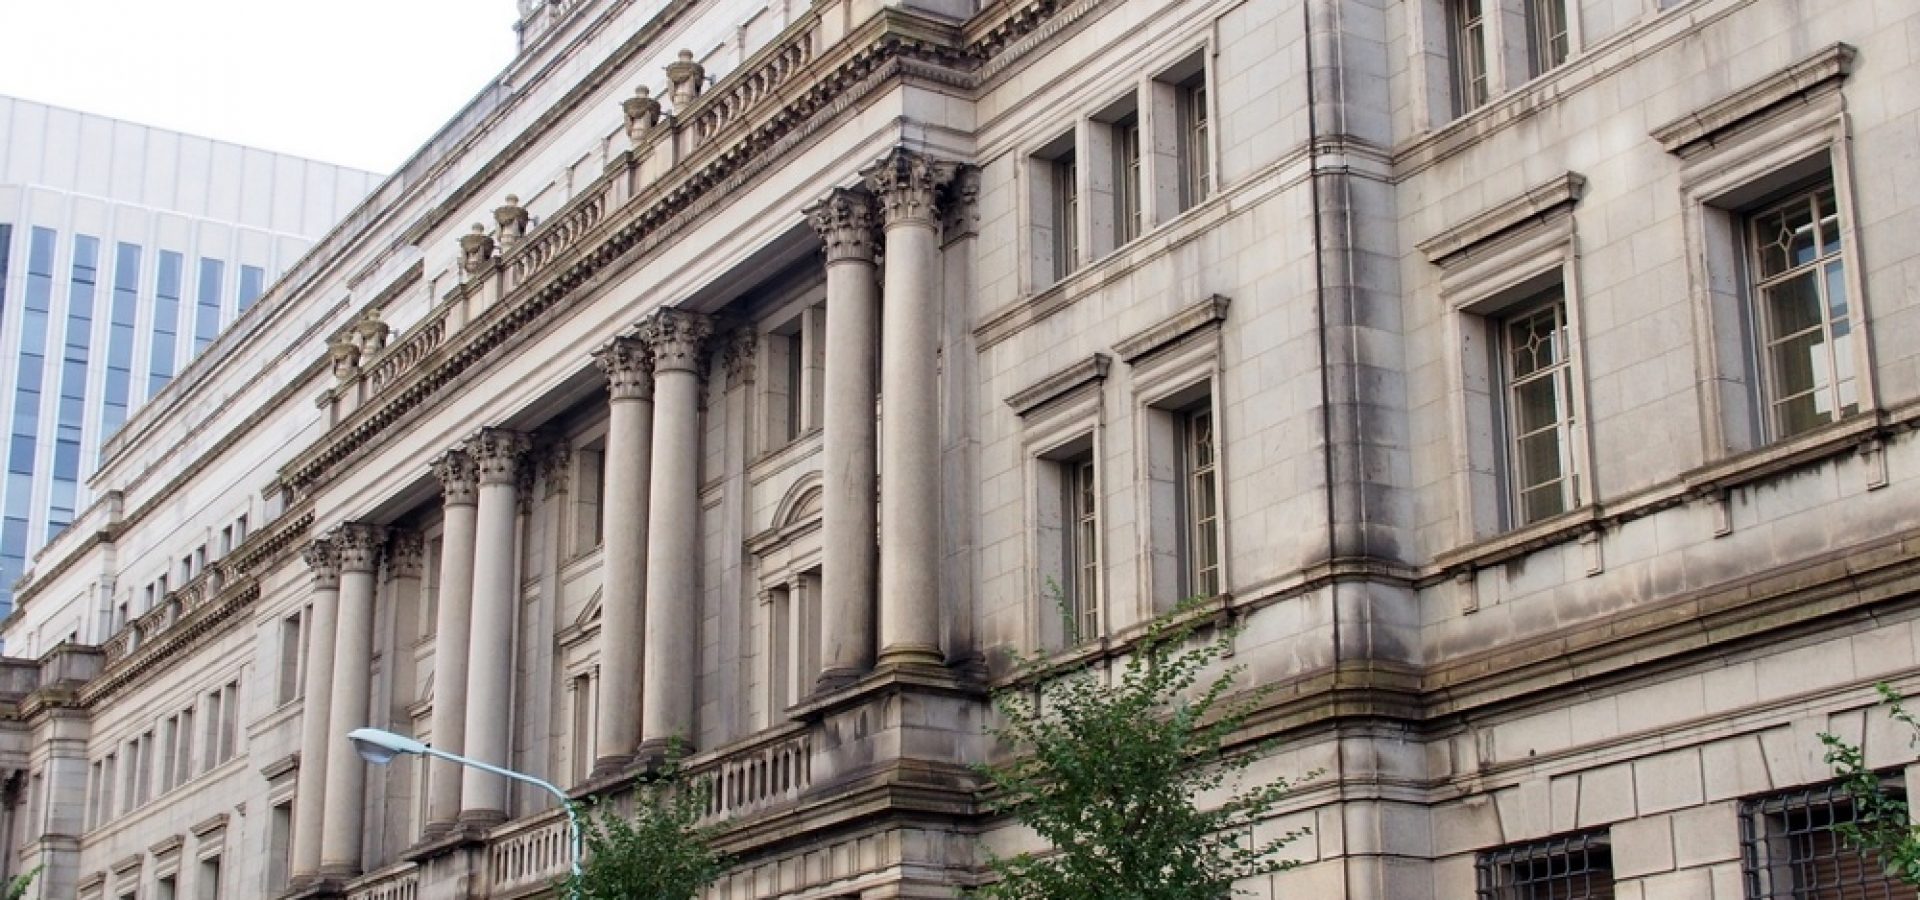 Wibest – BOJ: The headquarters of the Bank of Japan in Tokyo, Japan.